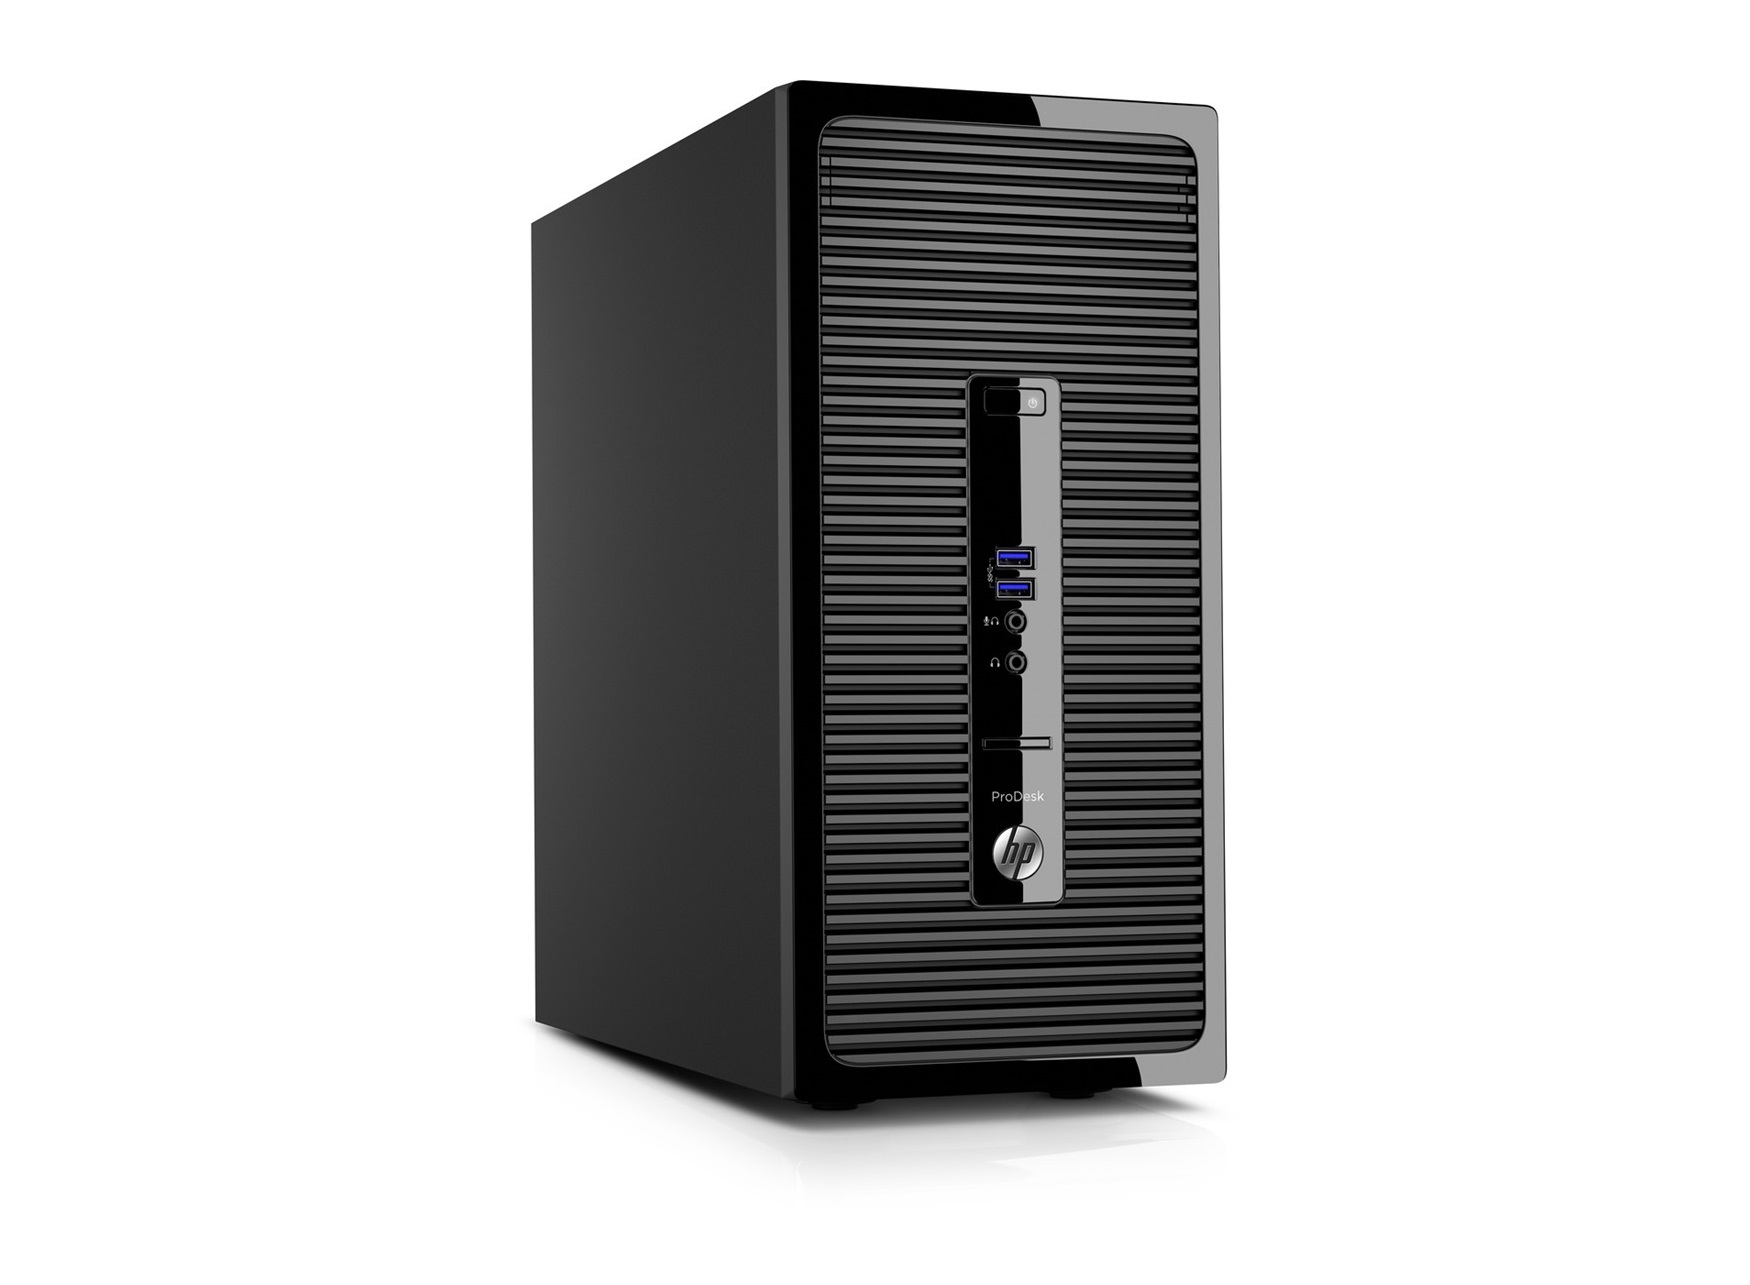 HP ProDesk 400 G3 Microtower PC